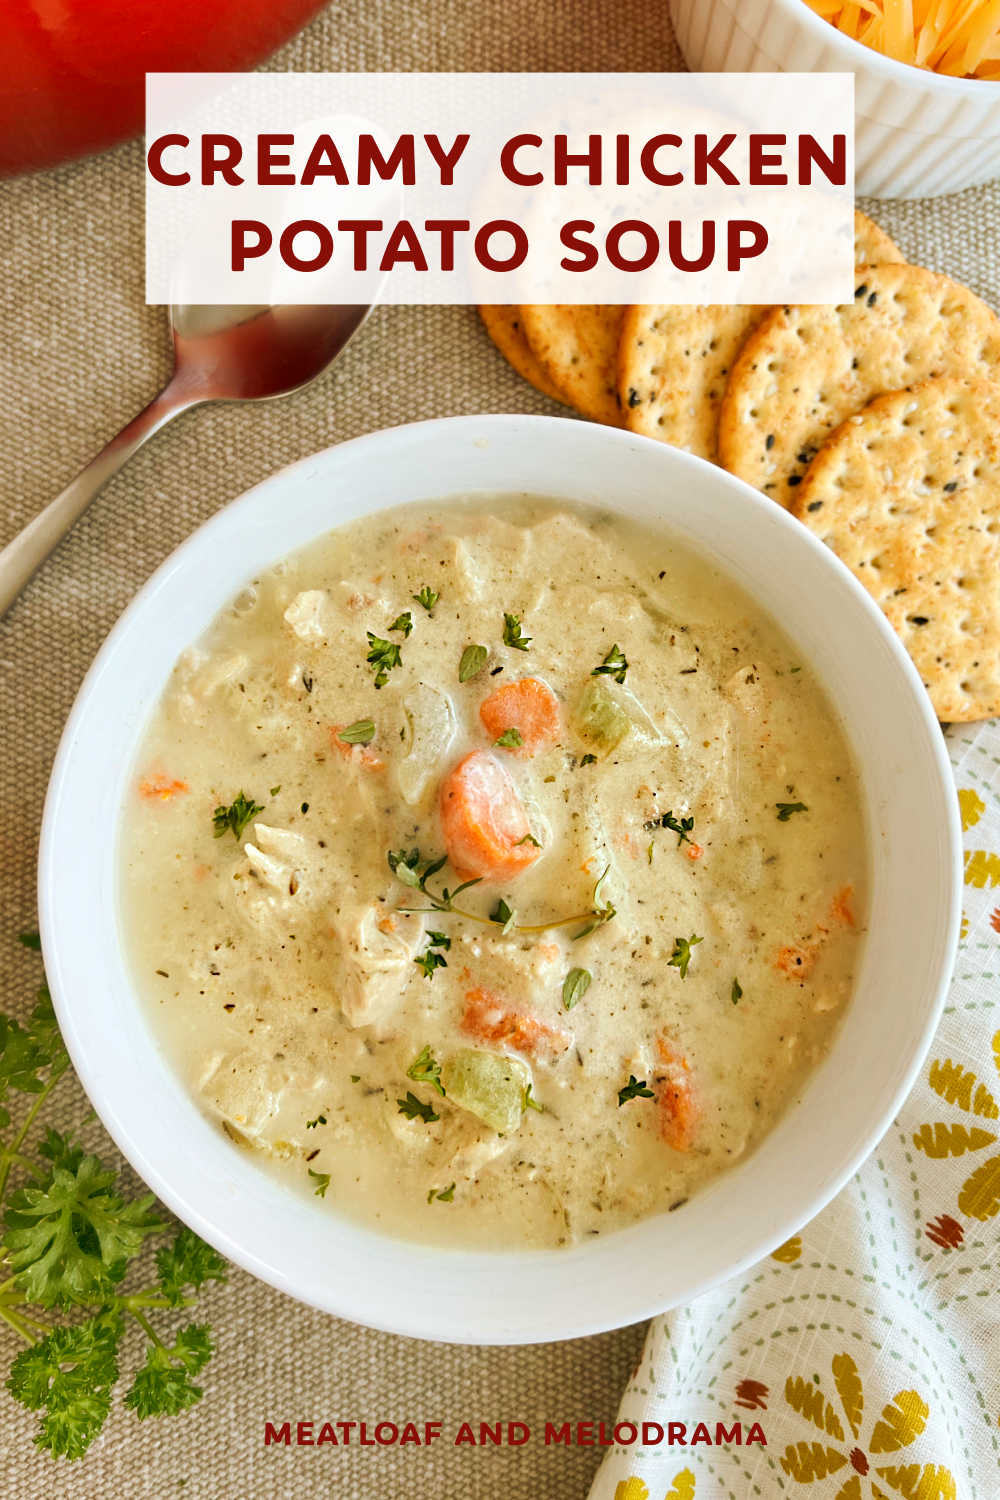 Chicken Potato Soup is an easy chicken soup recipe with tender potatoes, carrots and rotisserie chicken in a delicious creamy broth. One of our favorite soups for a cold night or chilly day! via @meamel